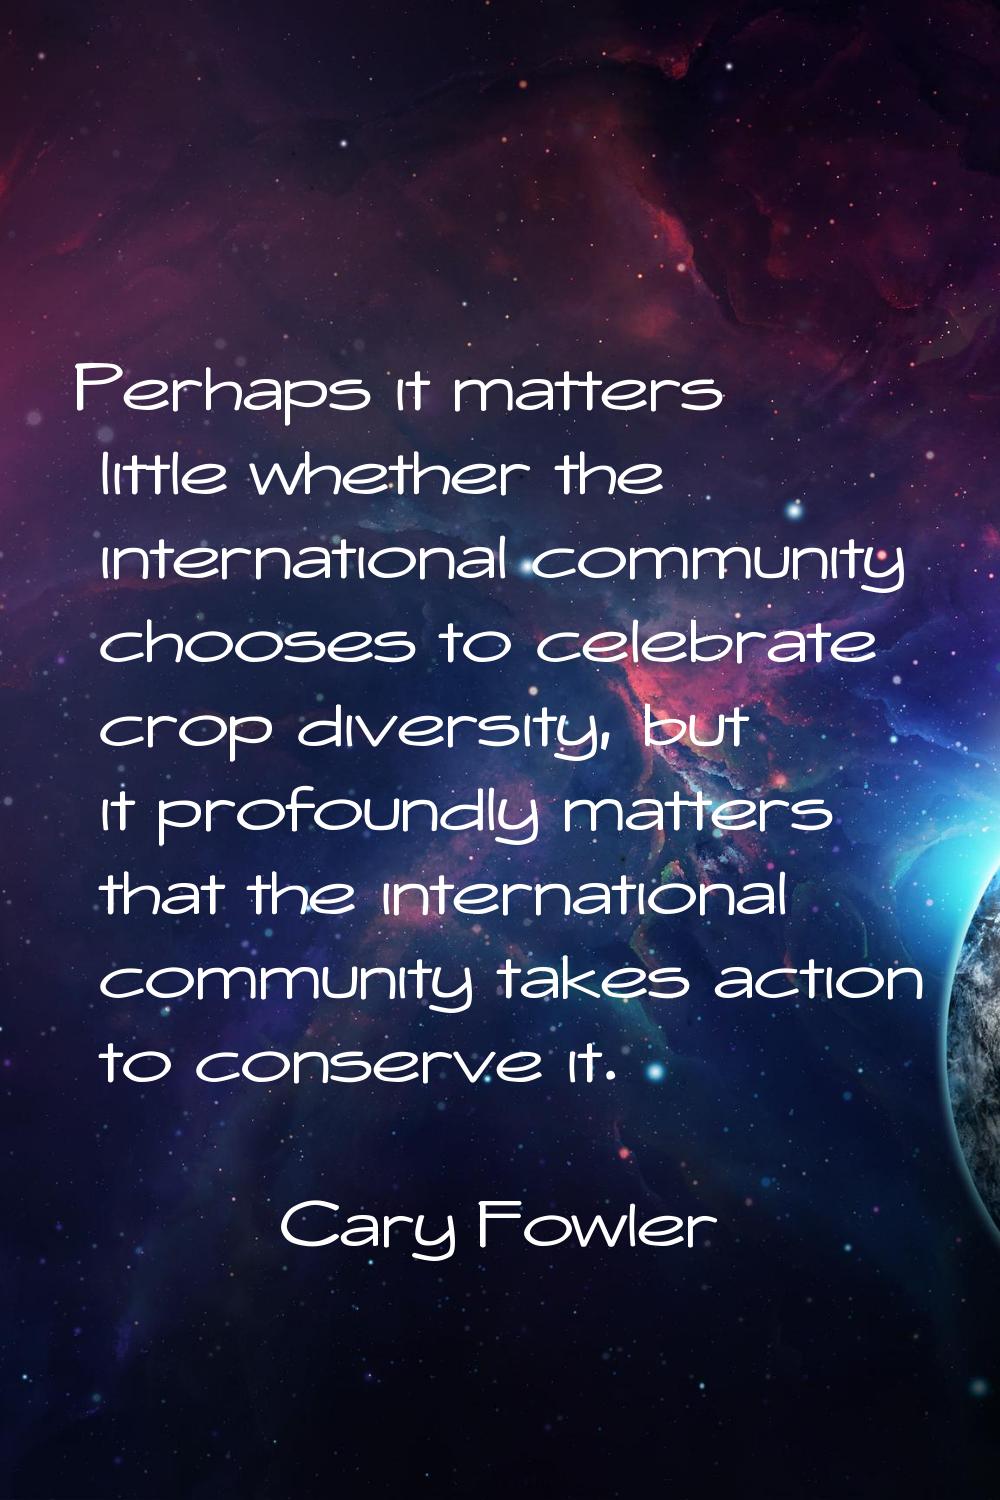 Perhaps it matters little whether the international community chooses to celebrate crop diversity, 